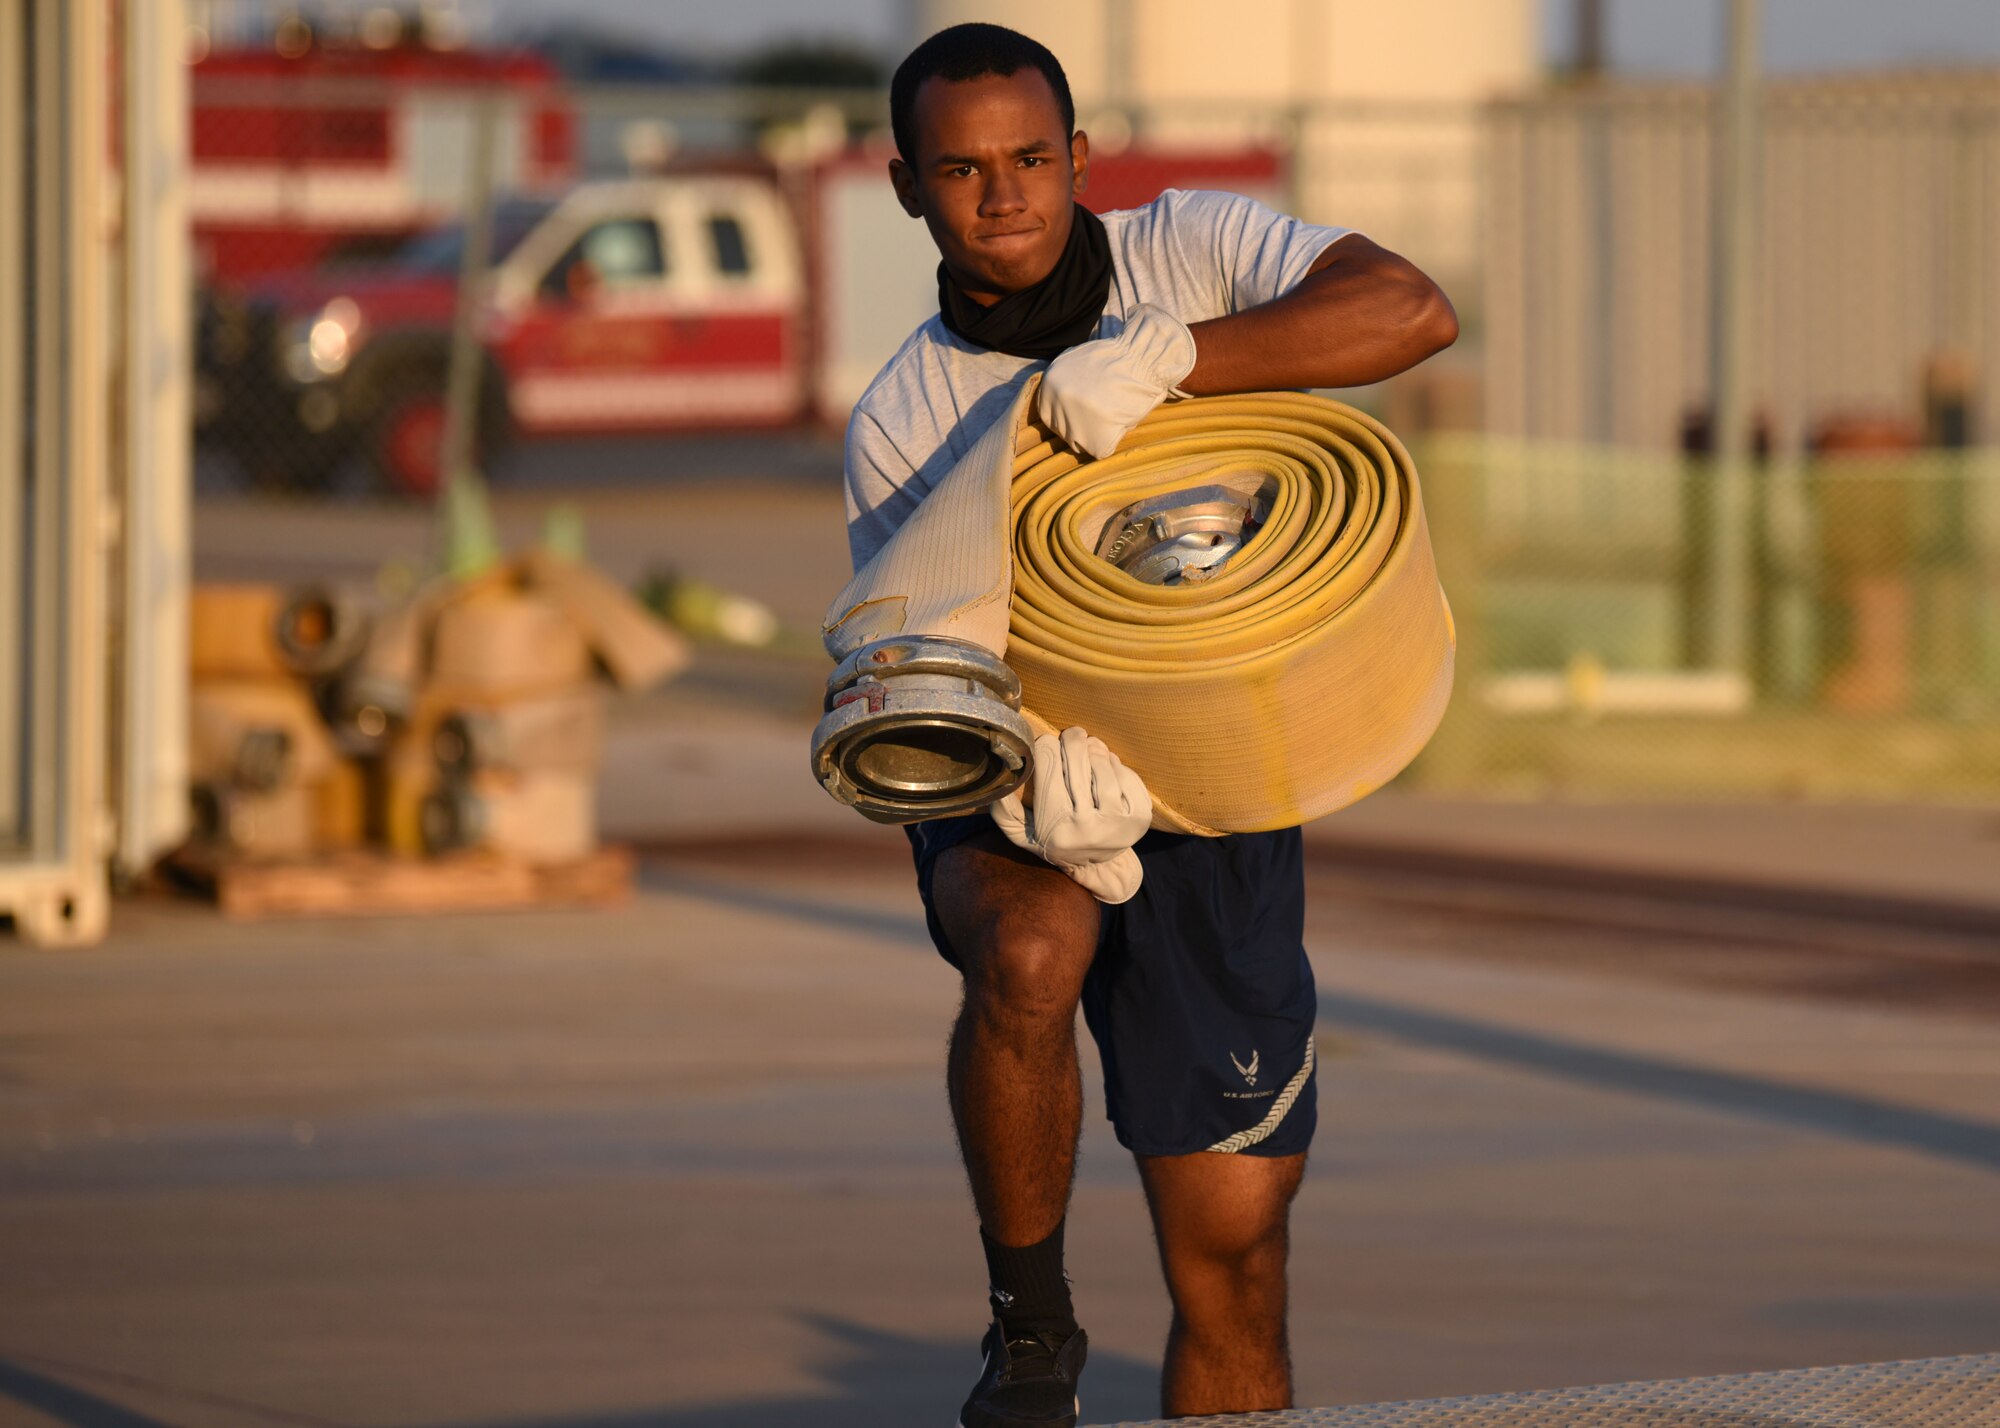 A 312th Training Squadron Student steps onto a platform with a five-inch-hose during Blood, Sweat, and Stairs at the Louis F. Garland Department of Defense Fire Academy, on Goodfellow Air Force Base, Texas, Oct. 10, 2020. This event represented first responders who had to carry heavy equipment into the twin towers to extract survivors during 9/11. (U.S. Air Force photo by Airman 1st Class Ethan Sherwood)